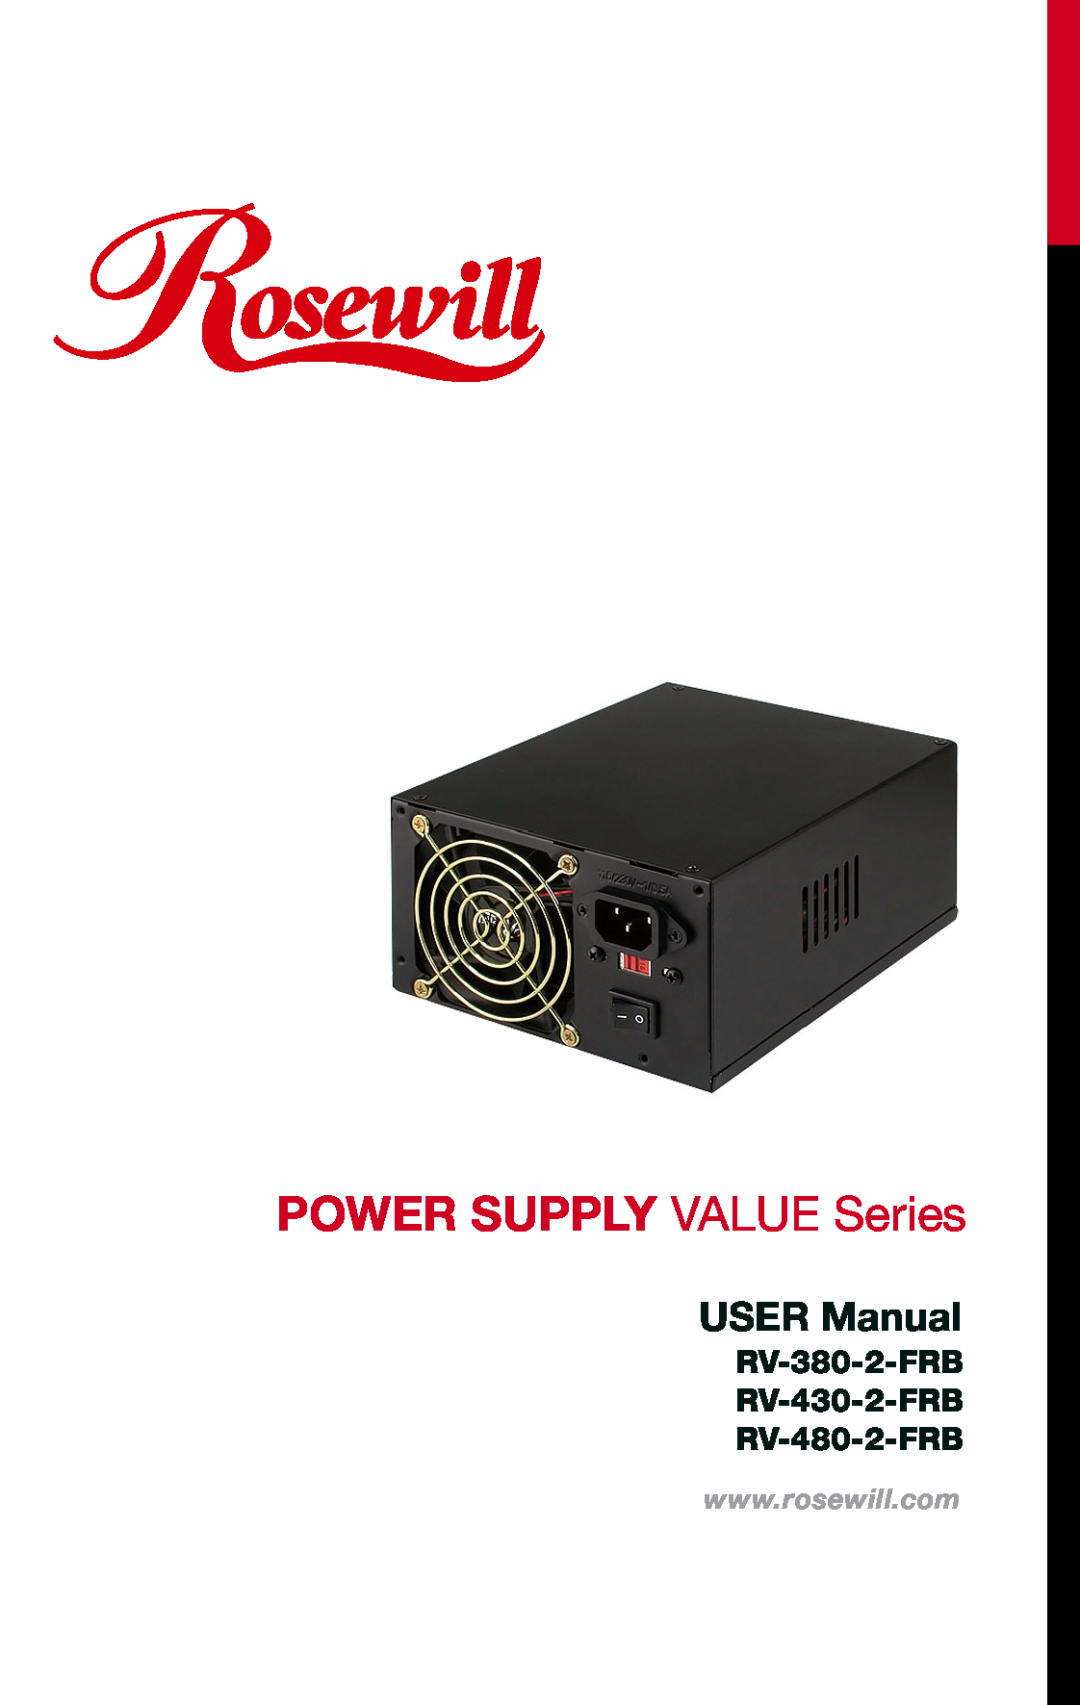 Rosewill user manual POWER SUPPLY VALUE Series, USER Manual, RV-380-2-FRB RV-430-2-FRB RV-480-2-FRB 